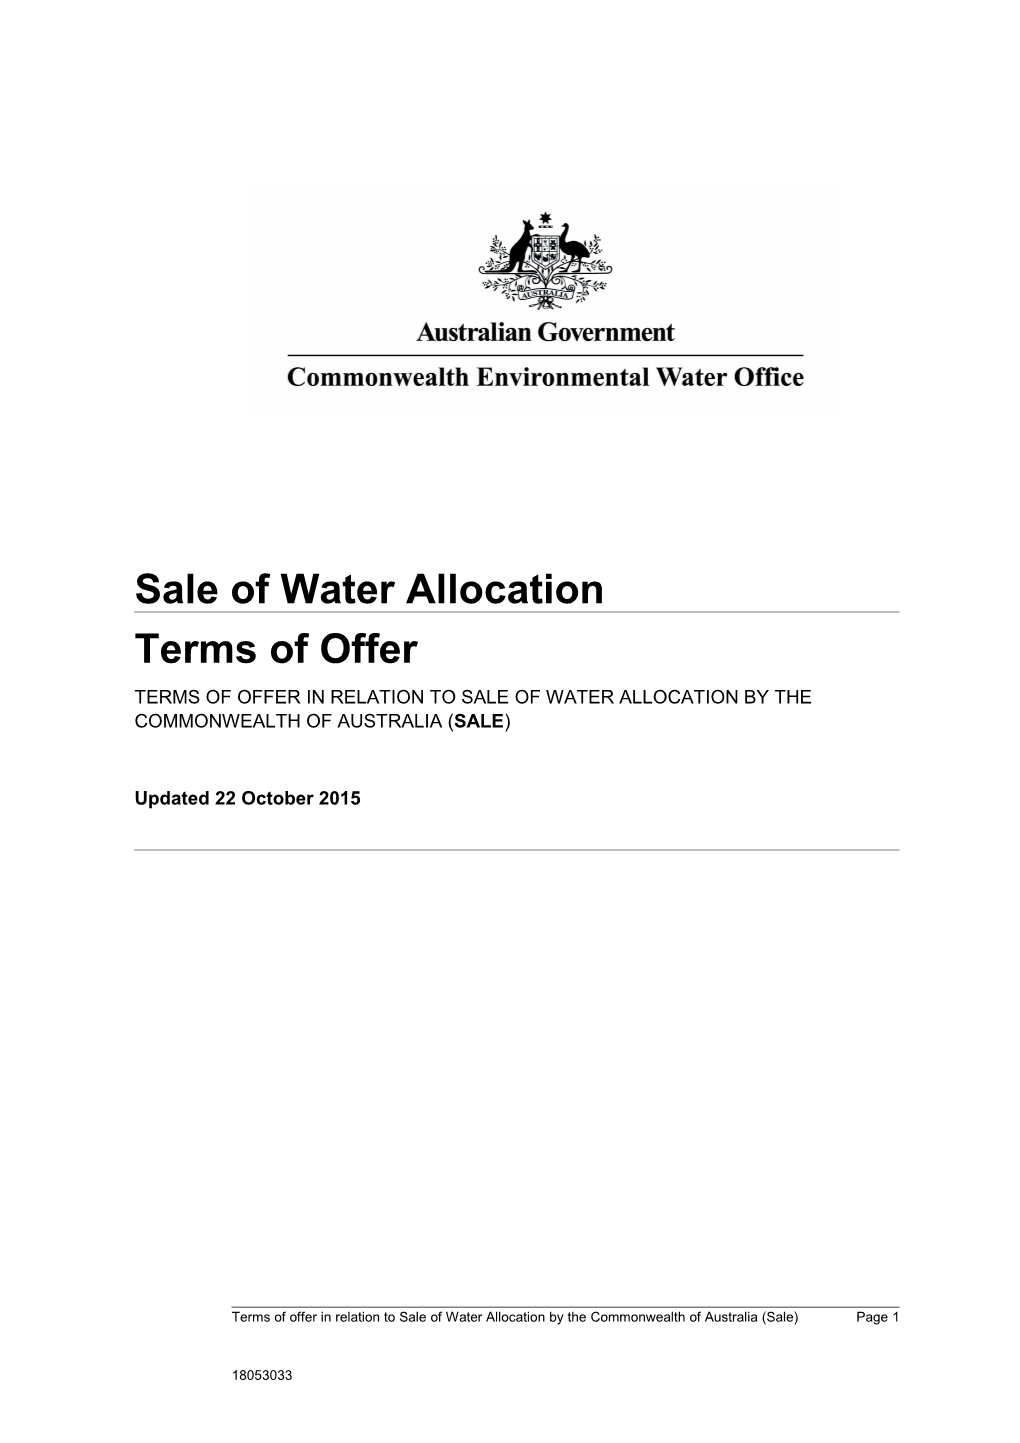 Sale of Water Allocation - Terms of Offer